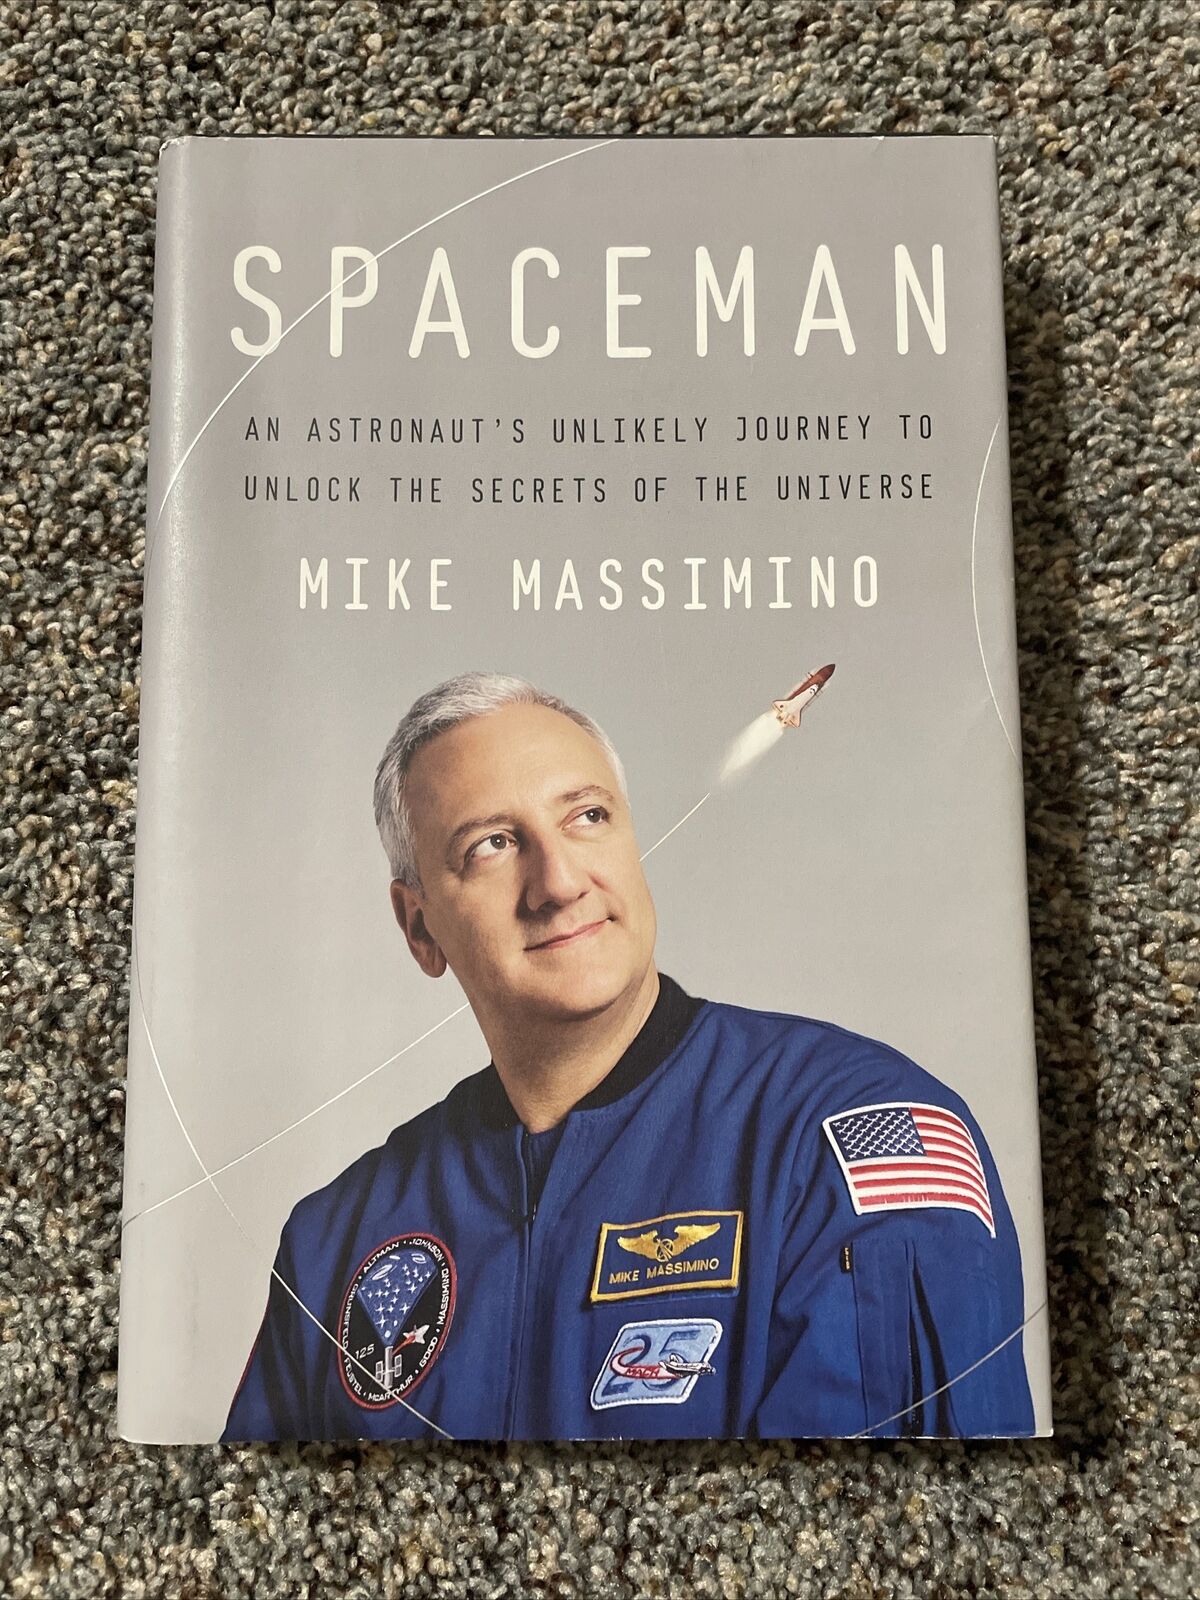 SPACEMAN-Astronaut\'s Unlikely Journey-MIKE MASSIMINO-1st Ed, Print-NEW hc w/dj